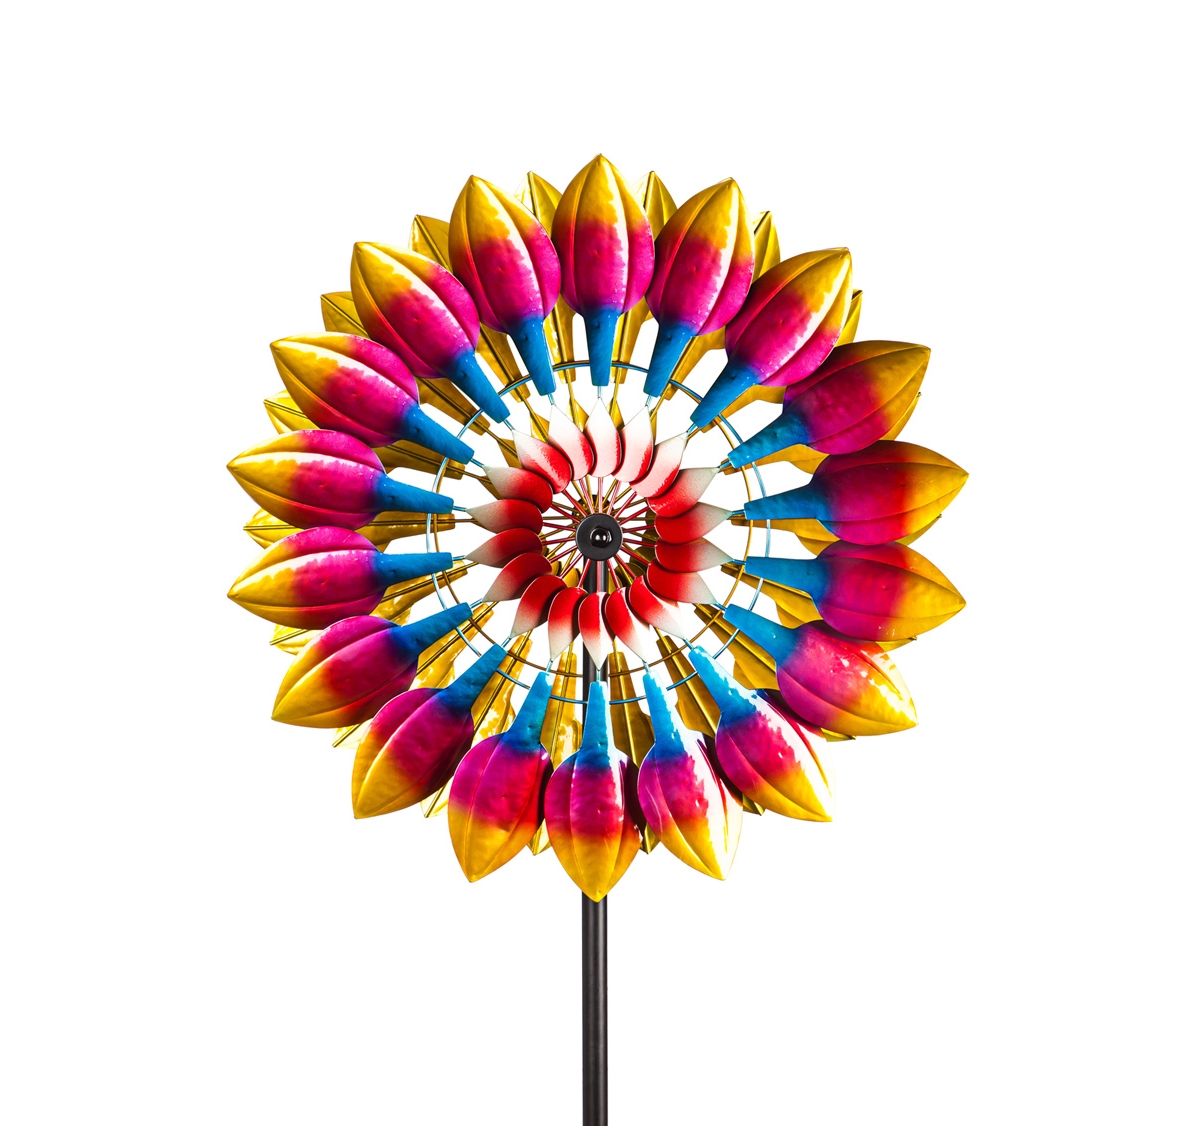 75"H Wind Spinner, Magenta Tulip Petals- Fade and Weather Resistant Outdoor Decor for Homes, Yards and Gardens - Multicolored